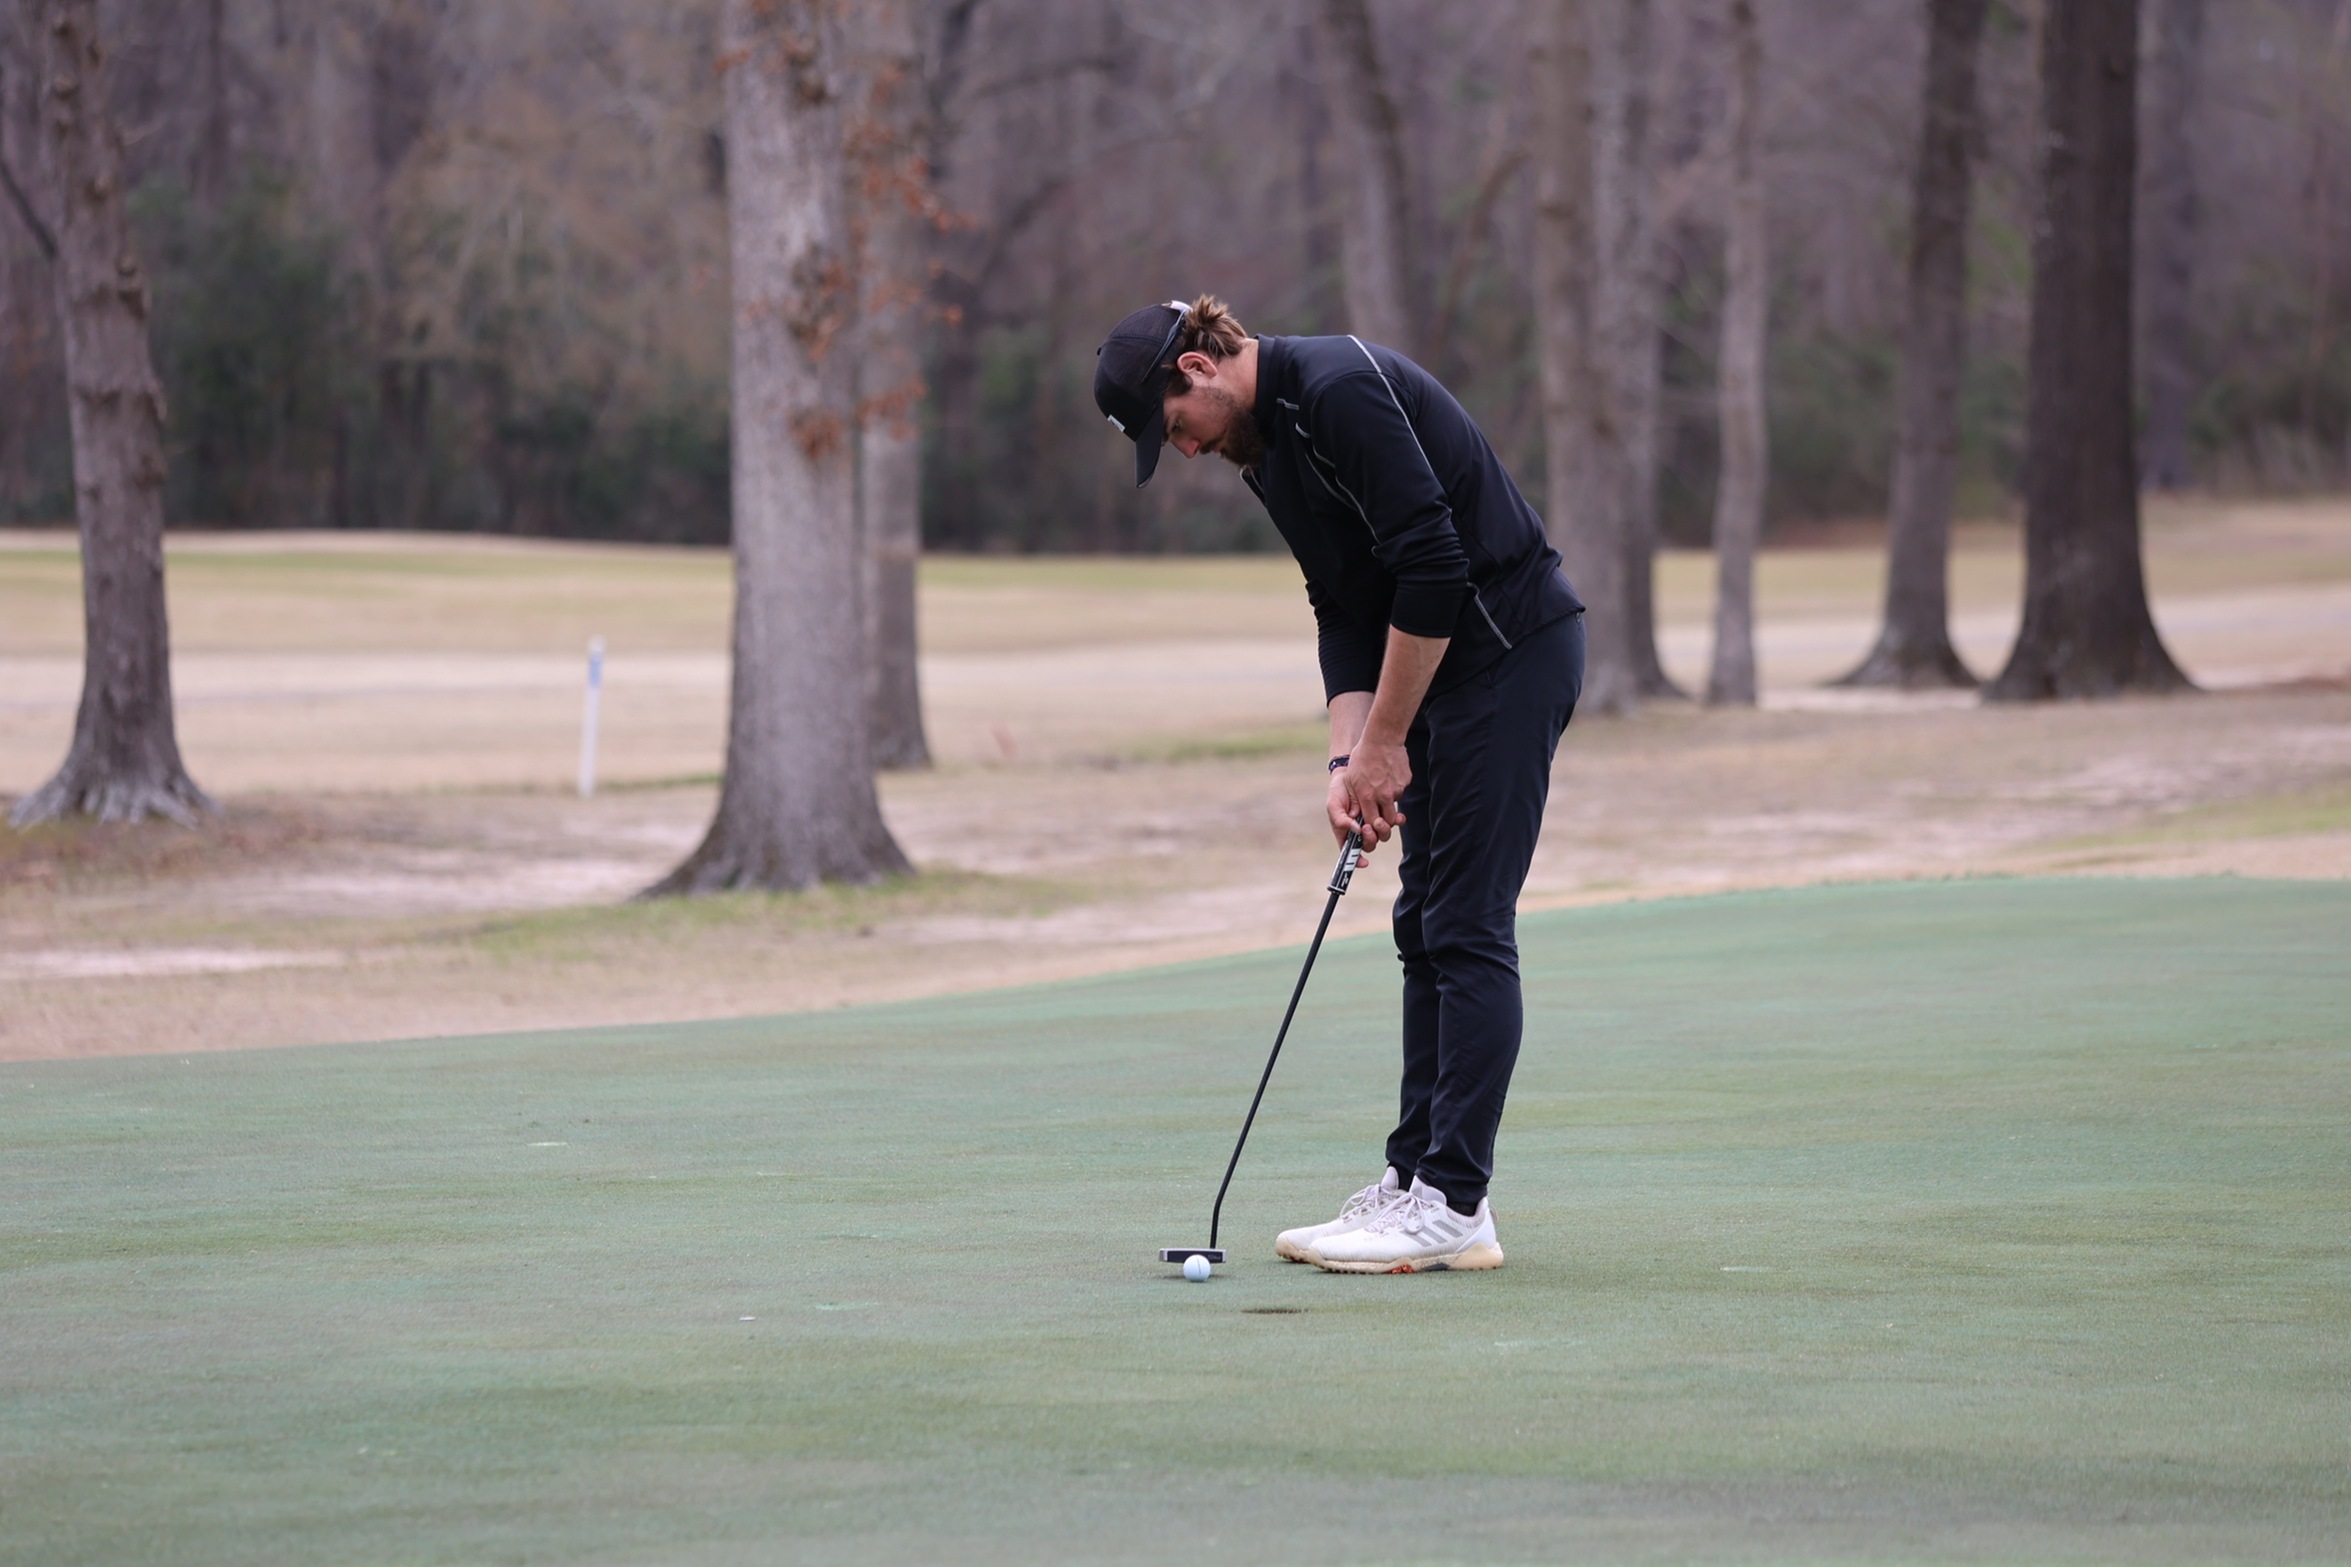 Junior Devan Martin shot a 5-over 77 on Monday as he eyes a top-10 finish.